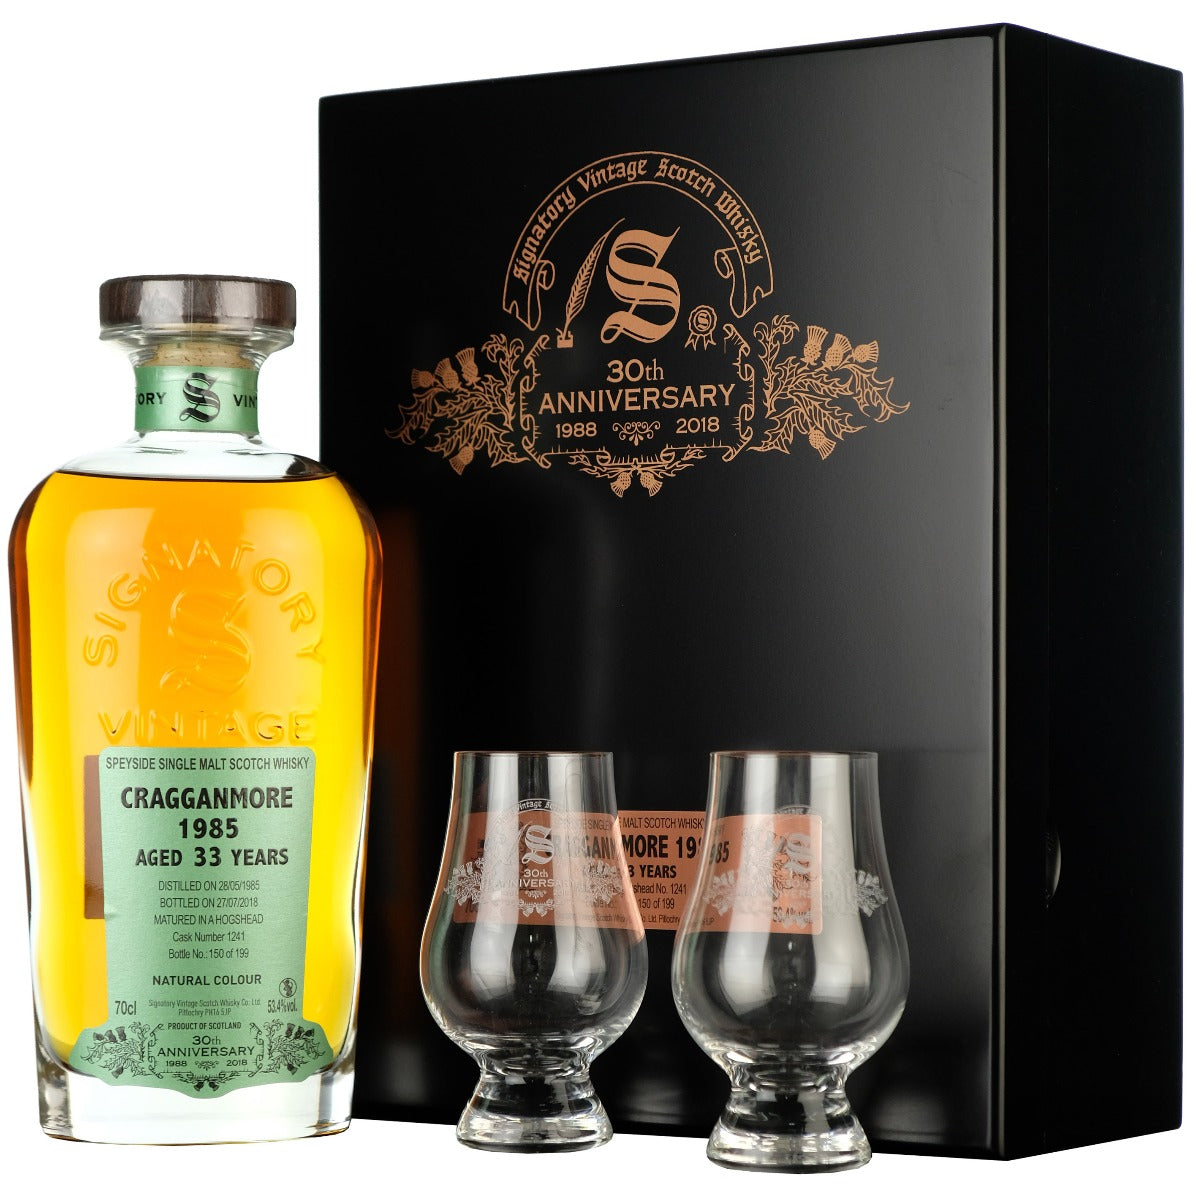 Craagganmore 1985 33 Year Old Signatory Vintage 30th Anniversary cask strength single cask speyside single malt scotch whisky